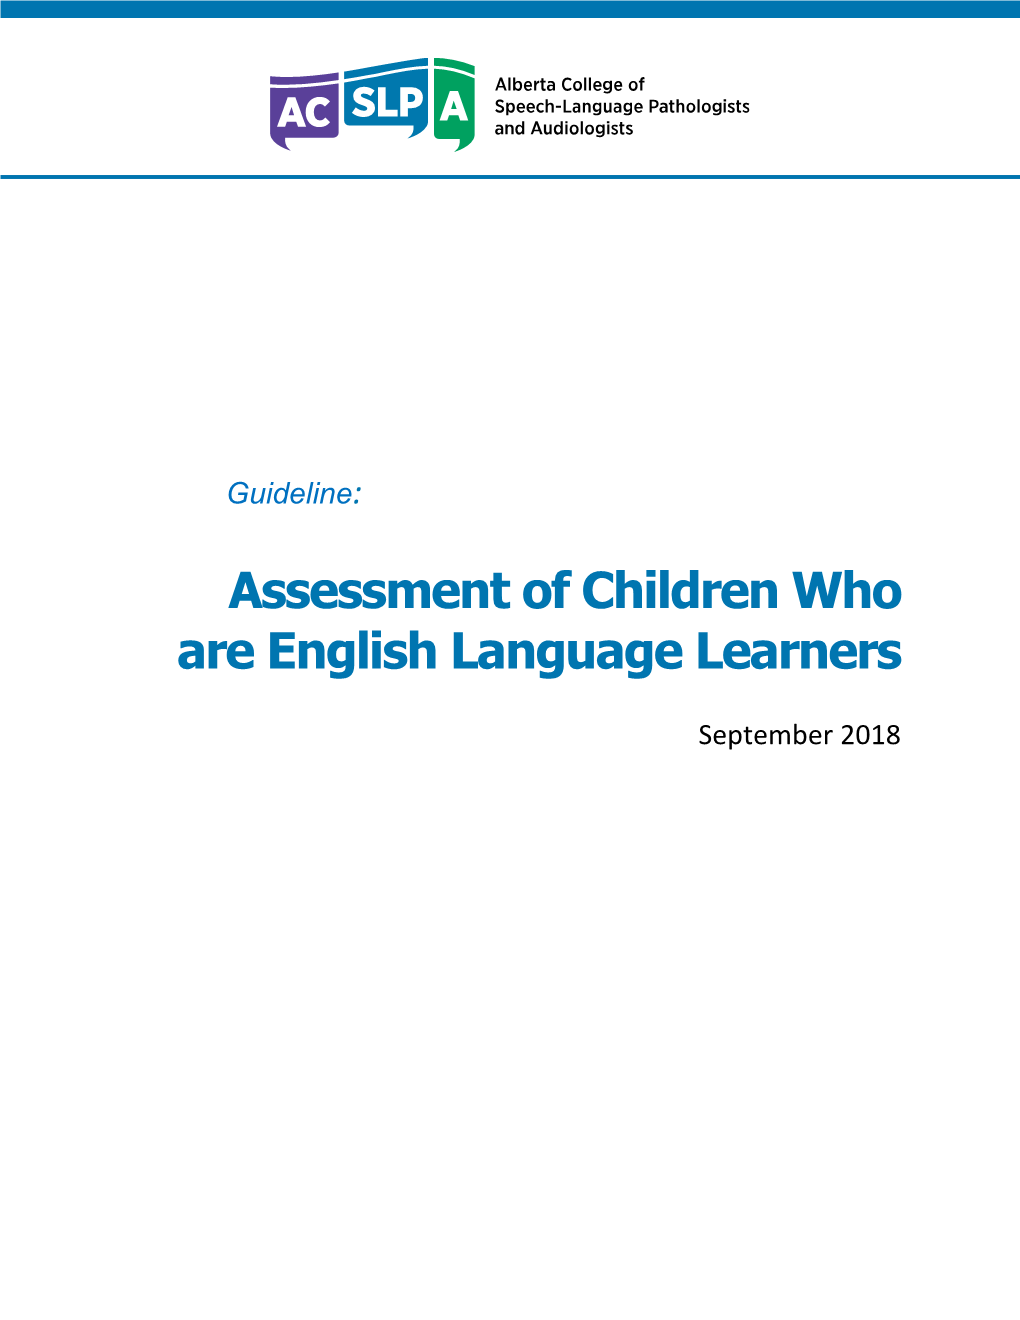 Assessment of Children Who Are English Language Learners